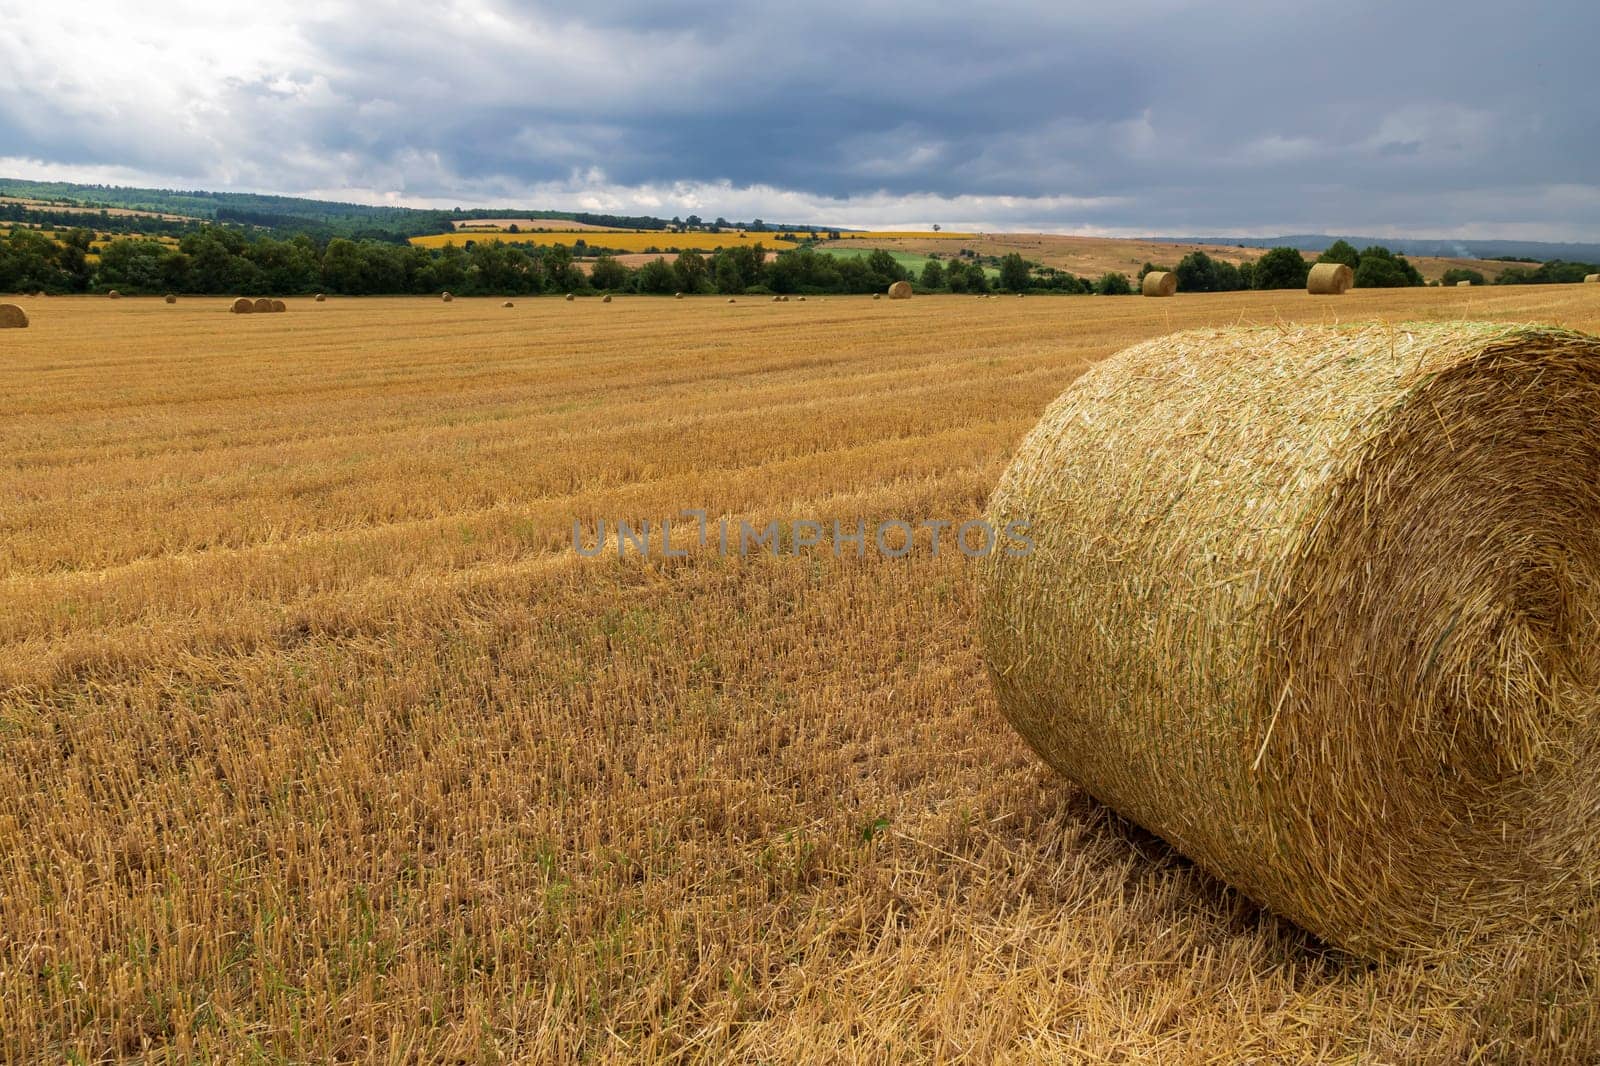 Big bales of hay on the field after harvest by EdVal